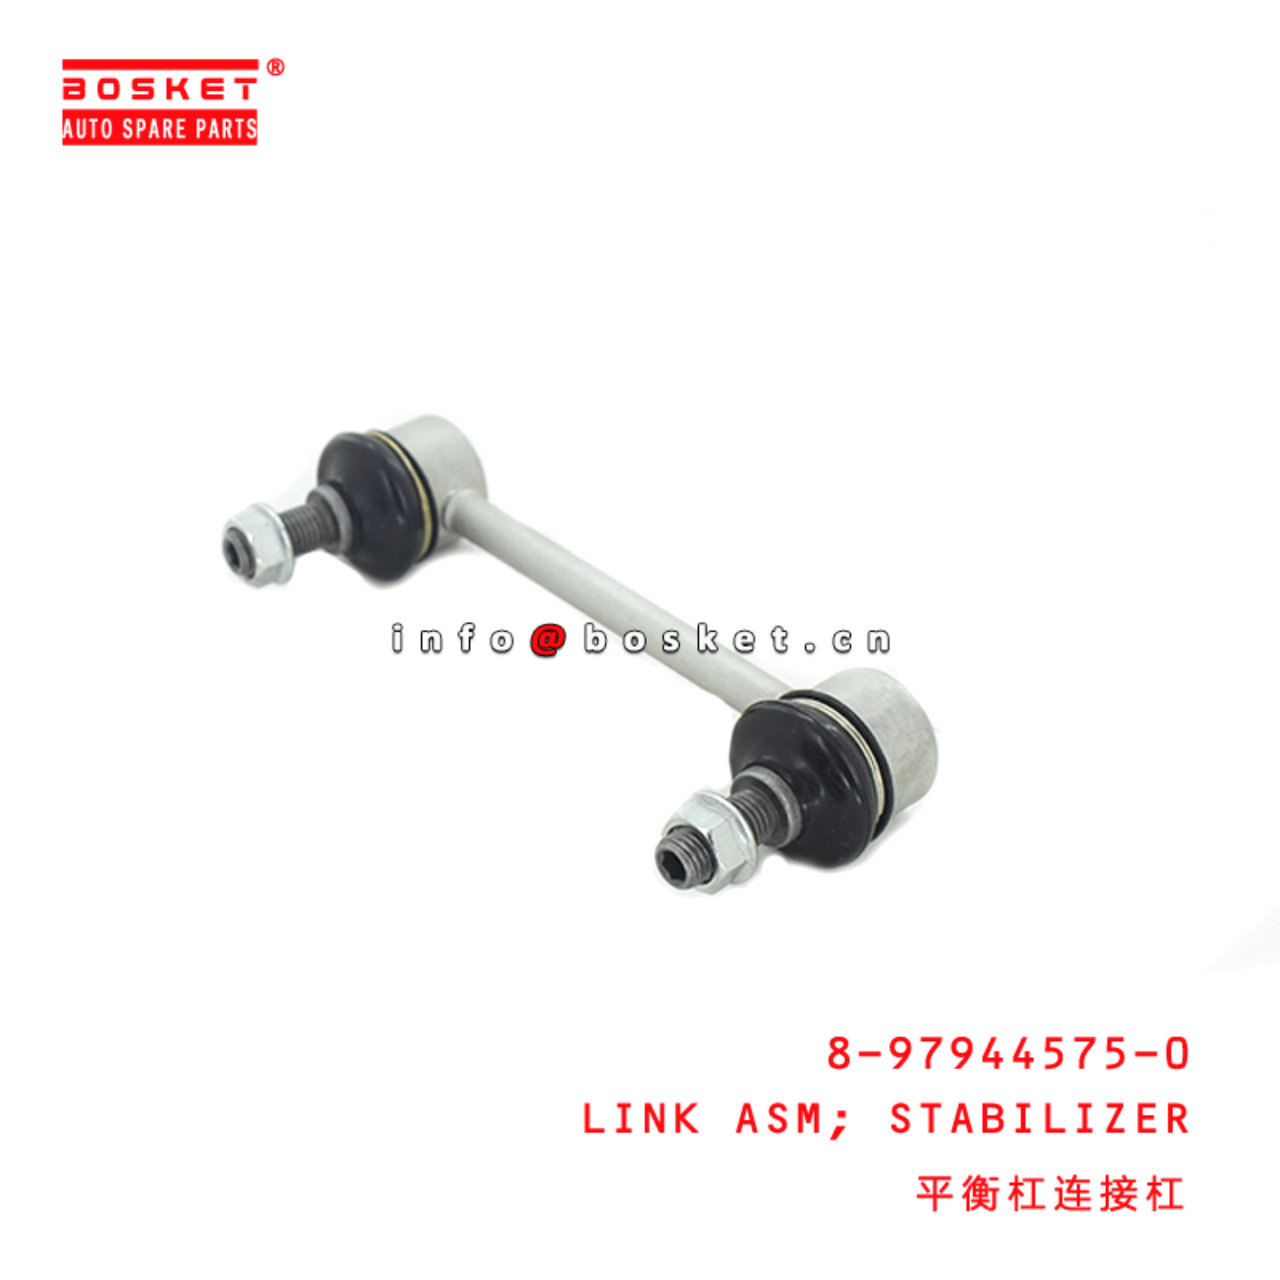 8-97944575-0 Stabilizer Link Assembly 8979445750 Suitable for ISUZU D-MAX 4X2